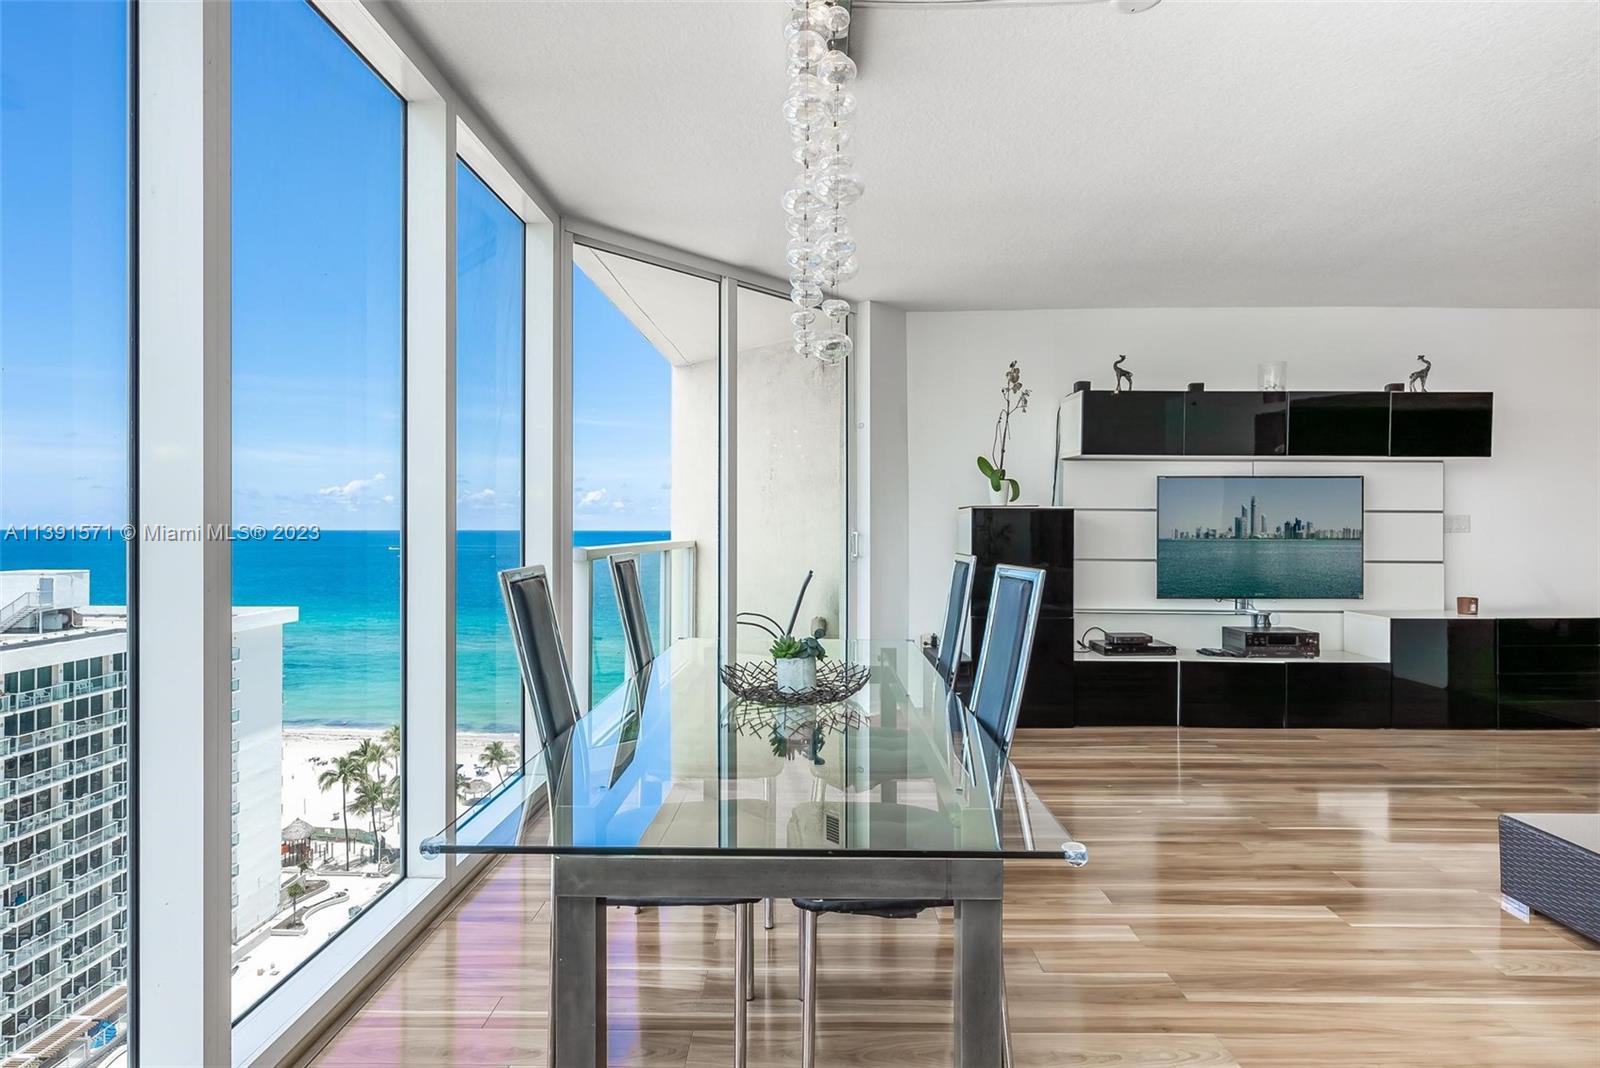 AVAILABLE AFTER AUGUST 10TH, 2024. Beautiful corner unit in Sunny Isles Beach’s oceanfront La Perla Condominium. North-East facing wrap-around balconies with fantastic ocean & city views. Unit Turnkey equipped with everything you need, or option to rent unfurnished. Full-service building offering ocean front resort-style pool, fitness center, full beach service, chairs, umbrellas, beach towels, billiard and ping-pong table, 24-hour valet, security and direct access to the best beach in South Florida! Walking distance to local shop and restaurants, including Sunny Isles Beach Pier.